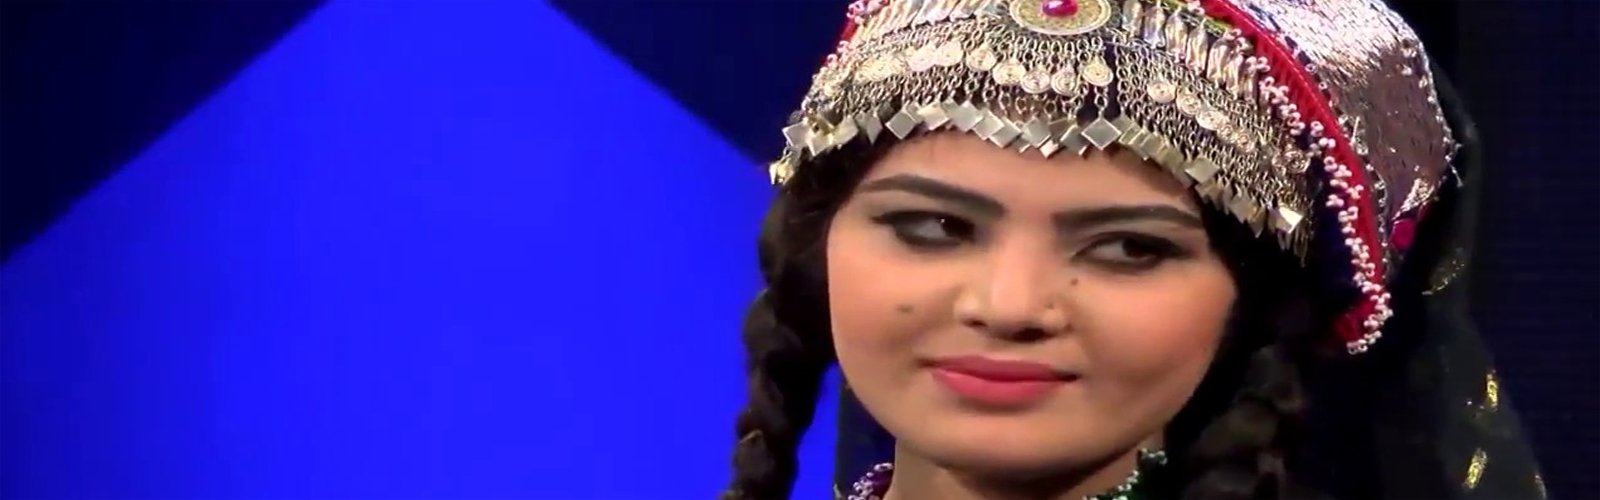 Afghan music contest pits first female finalist against rapper